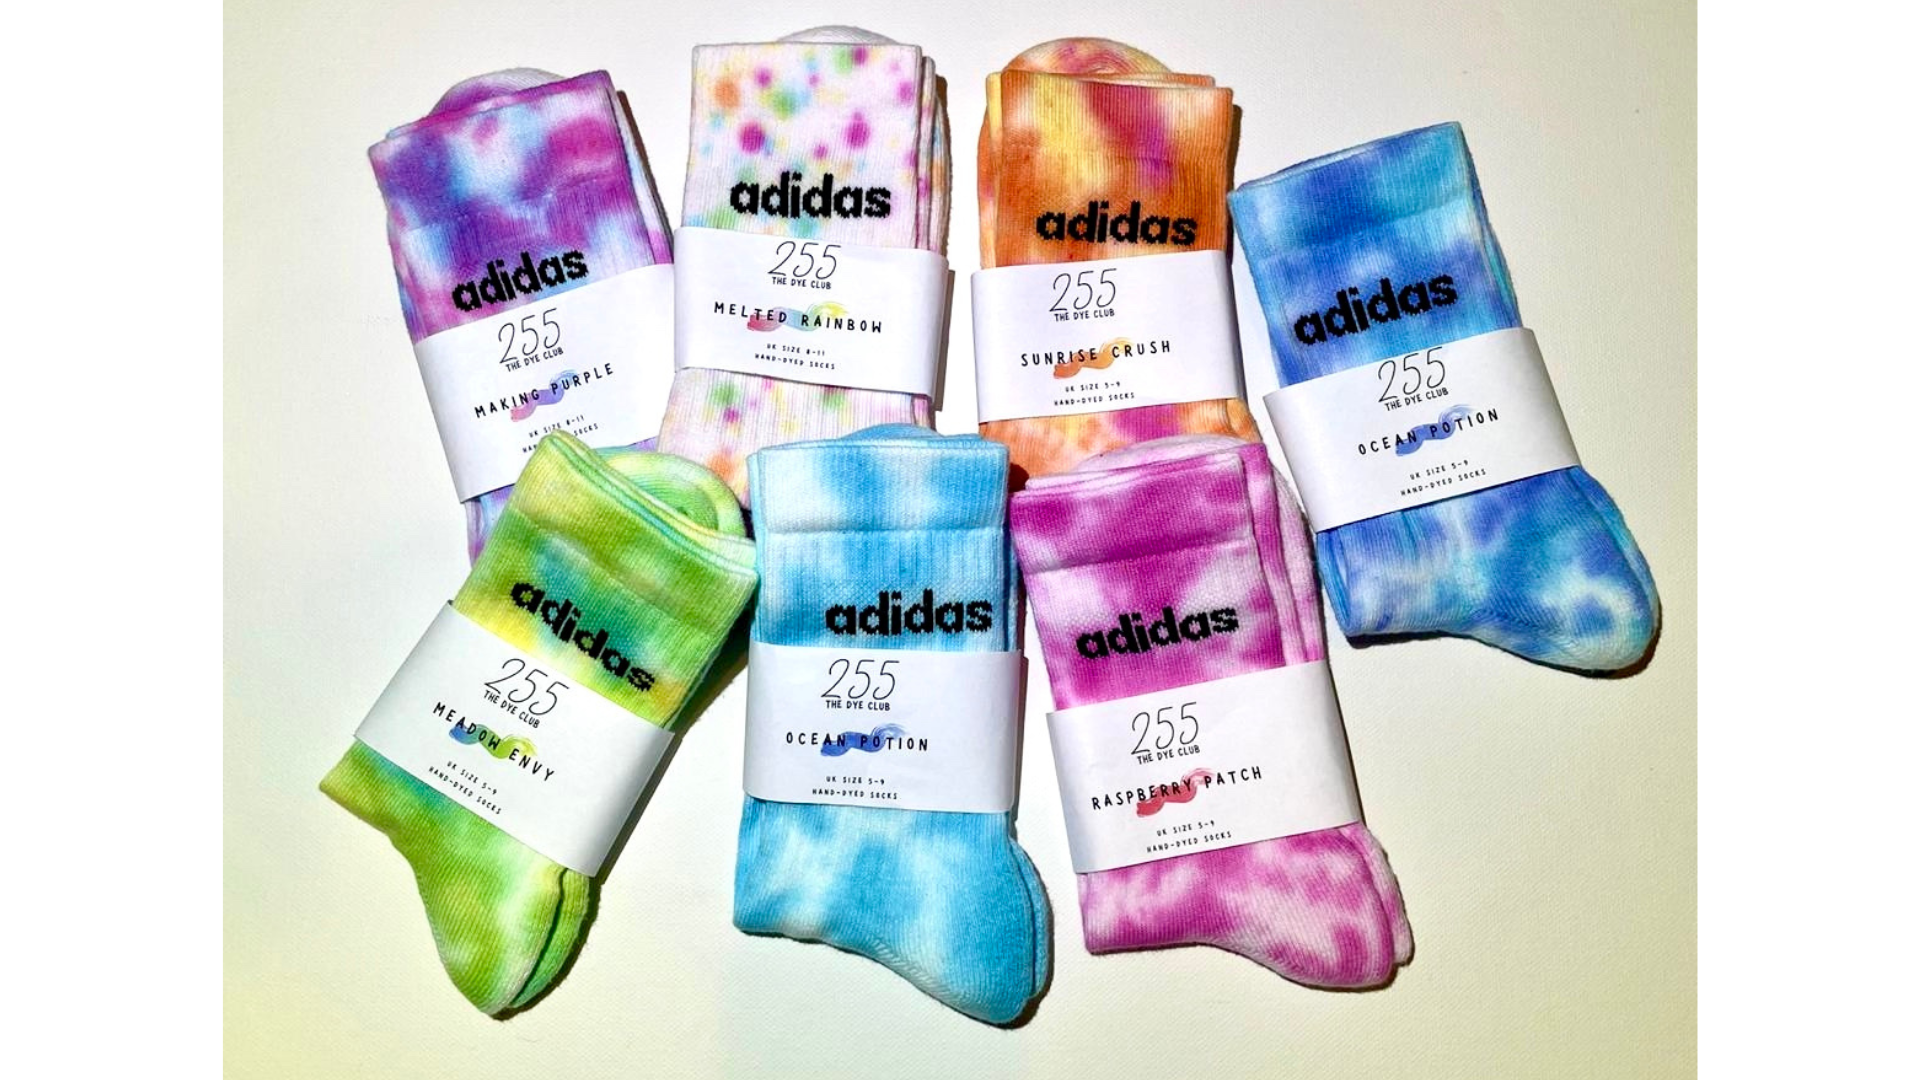 Hand-dyed Adidas MELTED RAINBOW – snow moon creations